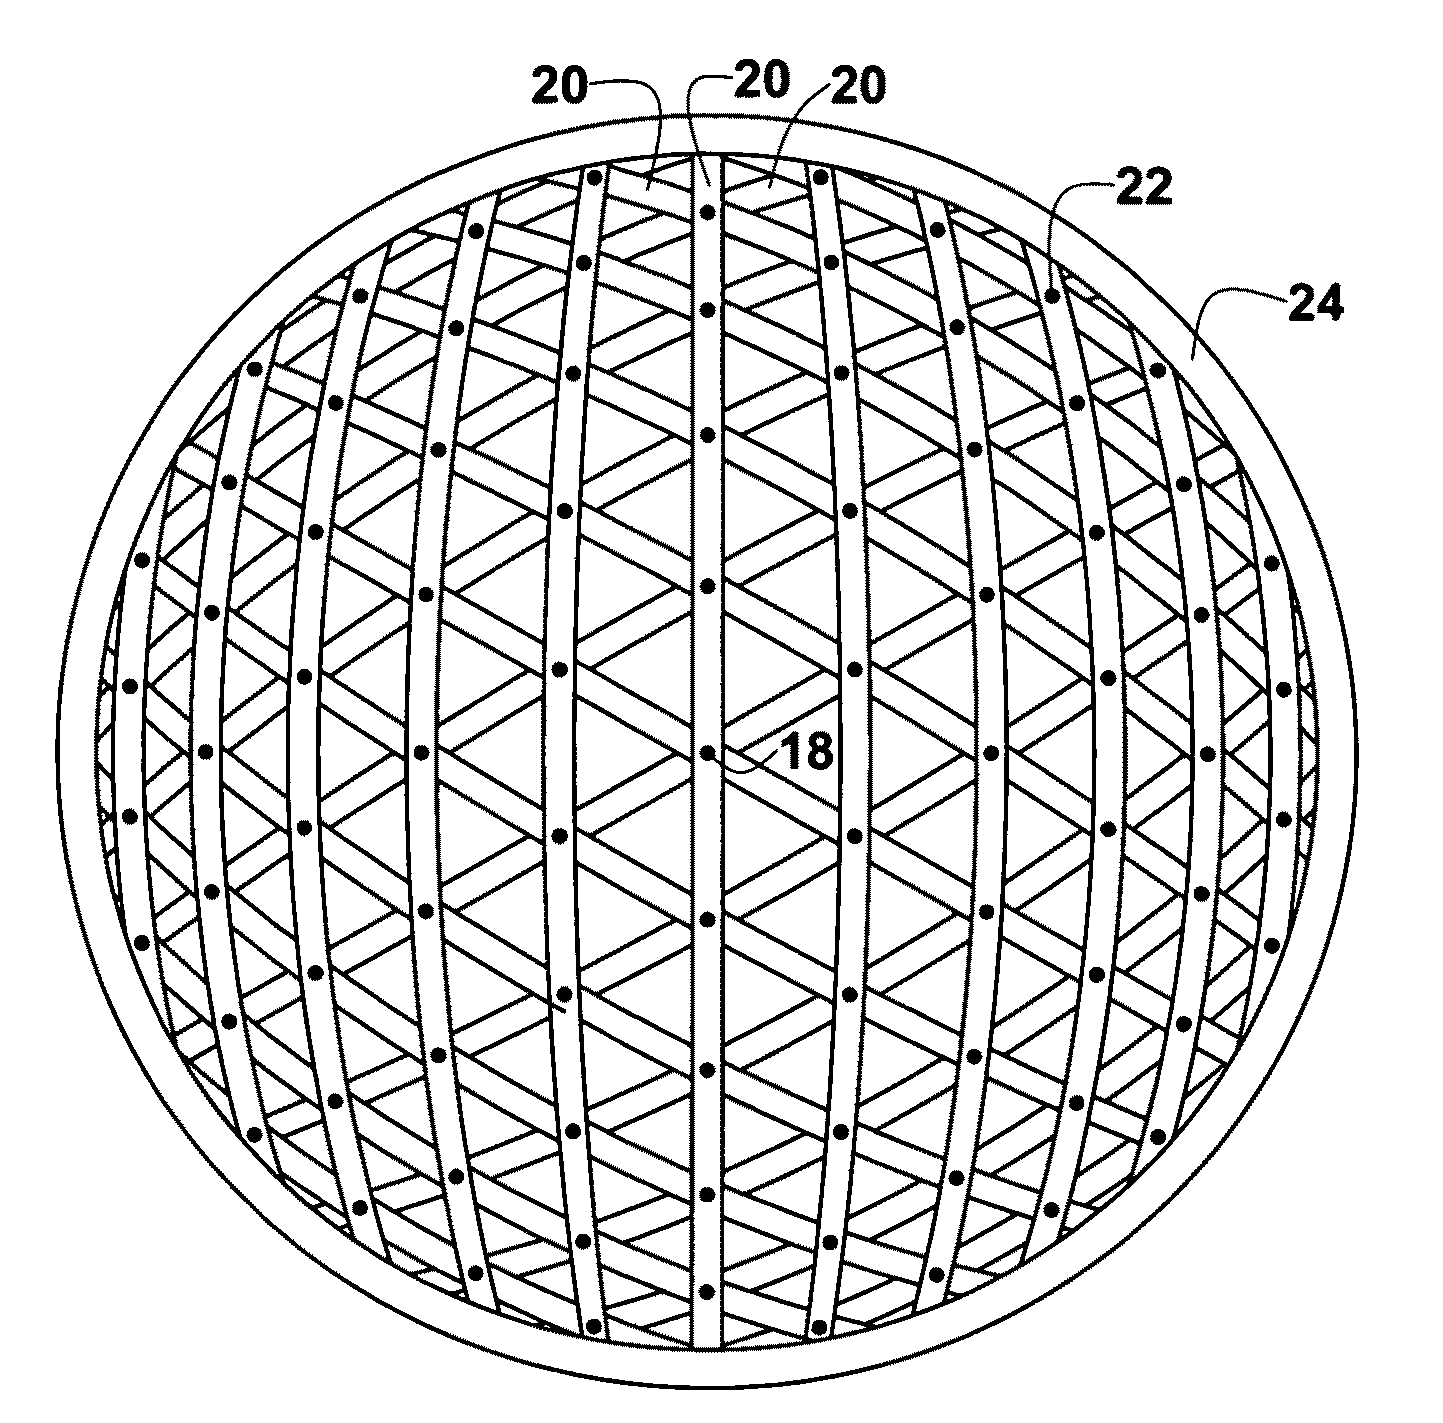 Spherical dome